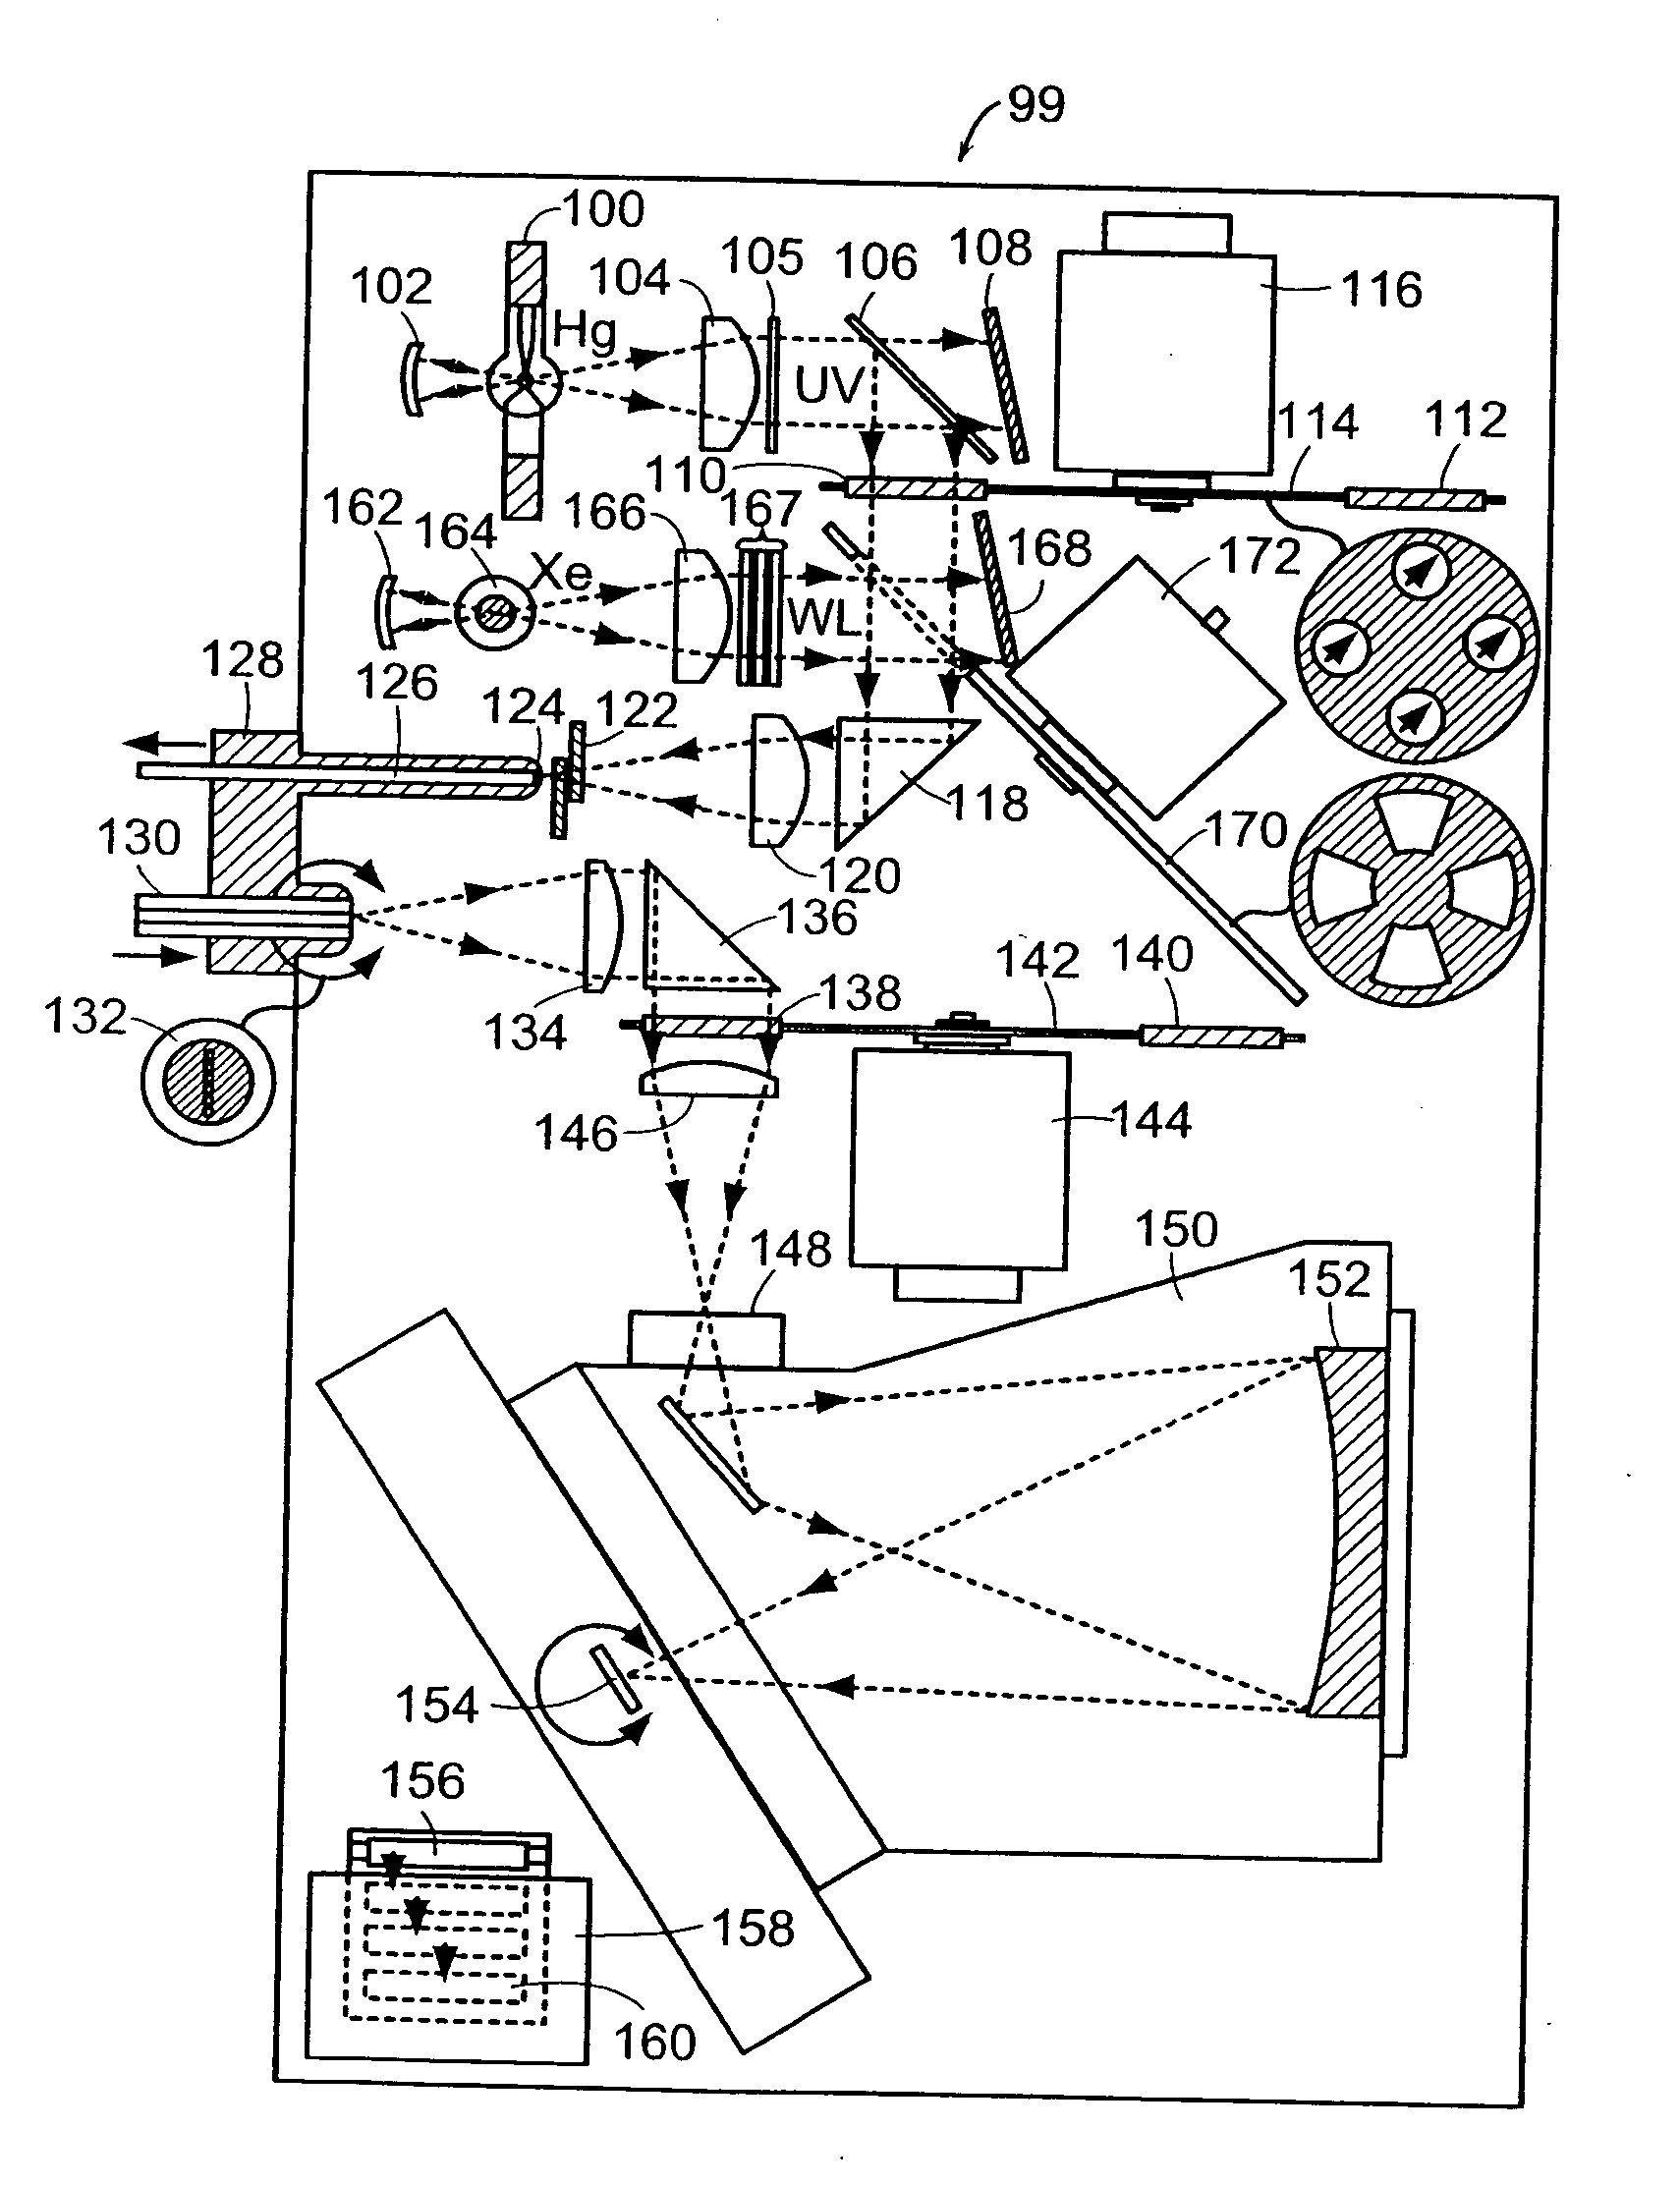 Spectroscopic diagnostic method and system based on scattering of polarized light